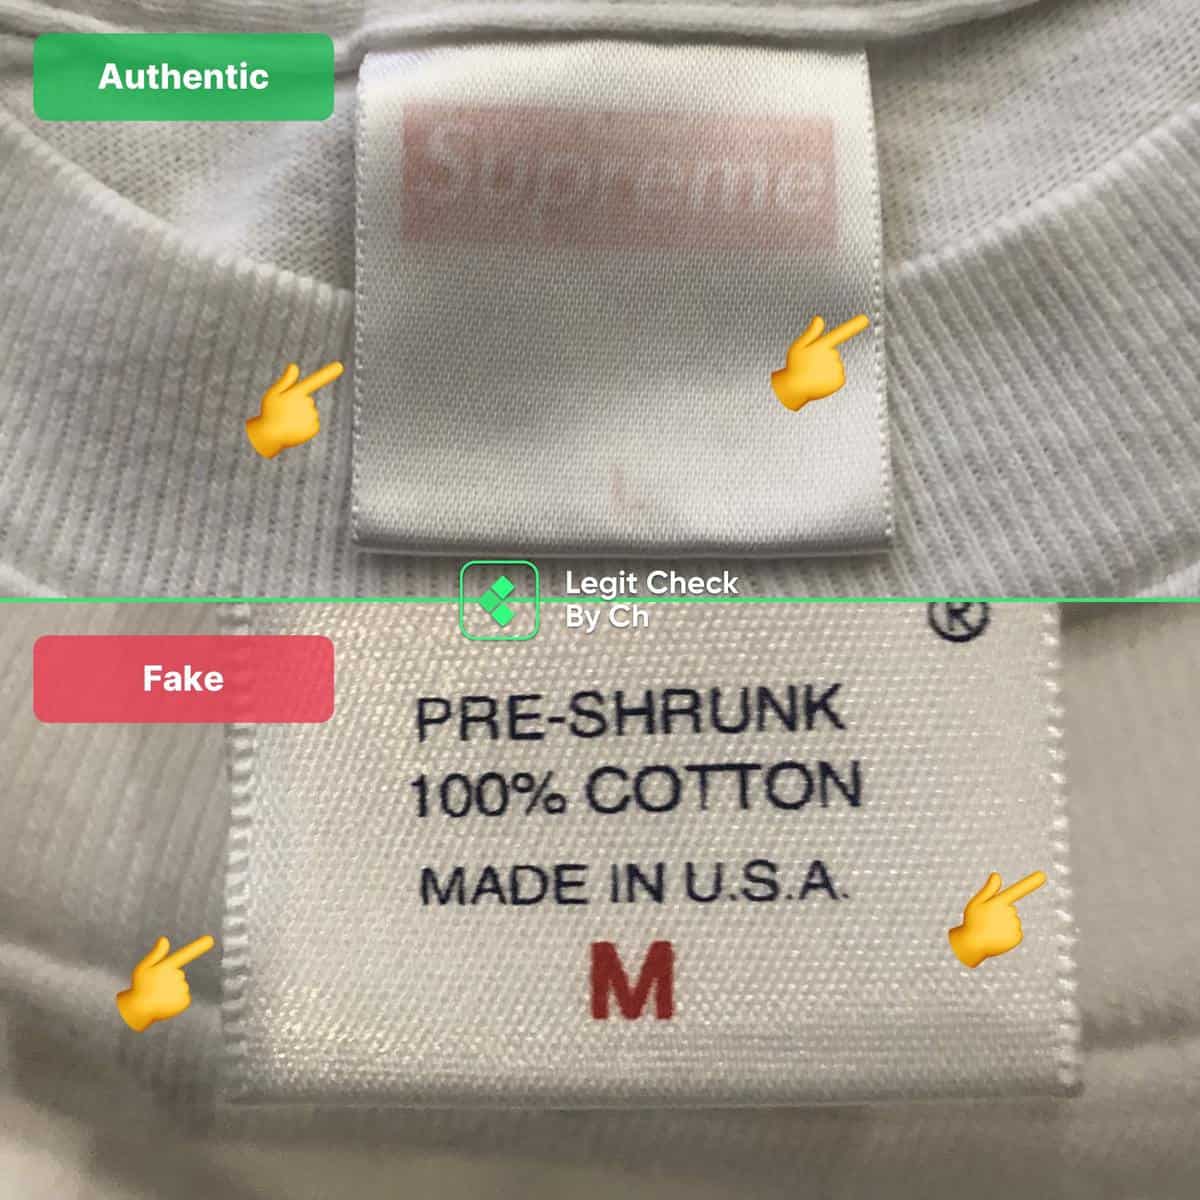 Legit Check, Supreme, Bape, Yeezy, Sneakers And Clothes Deluxe.